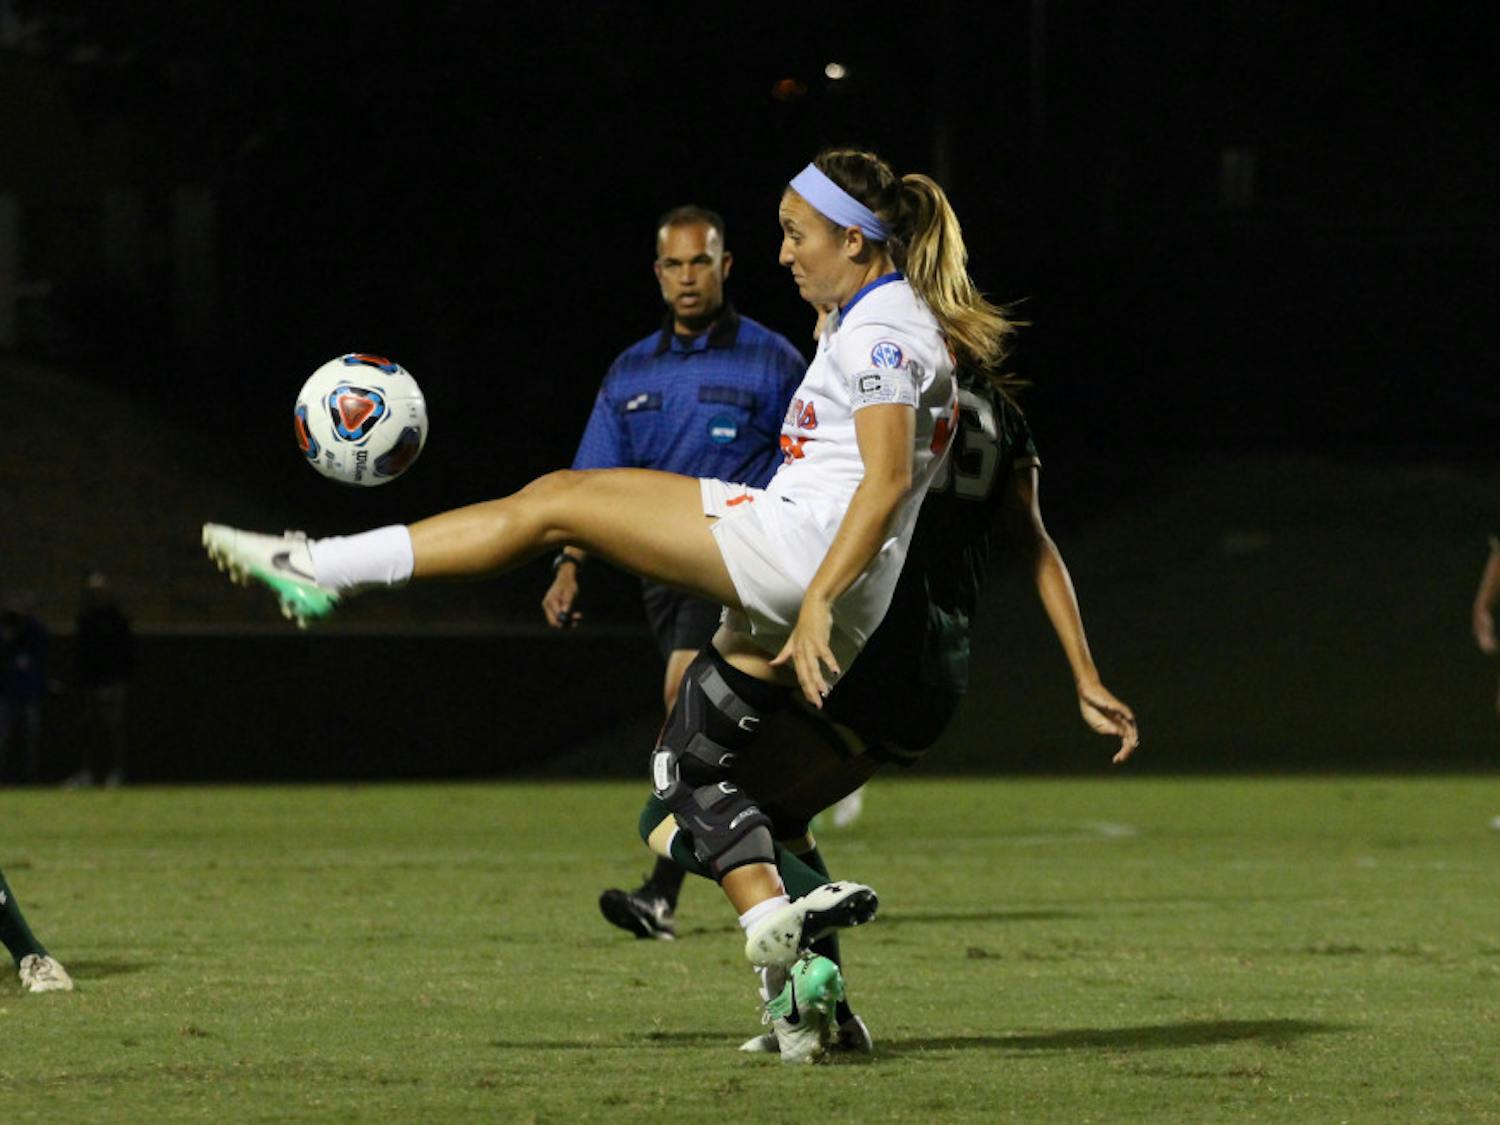 In her last home game as Gator, Gabby Seiler played all 104 minutes of the double-overtime thriller against Washington State on Sunday in multiple positions.